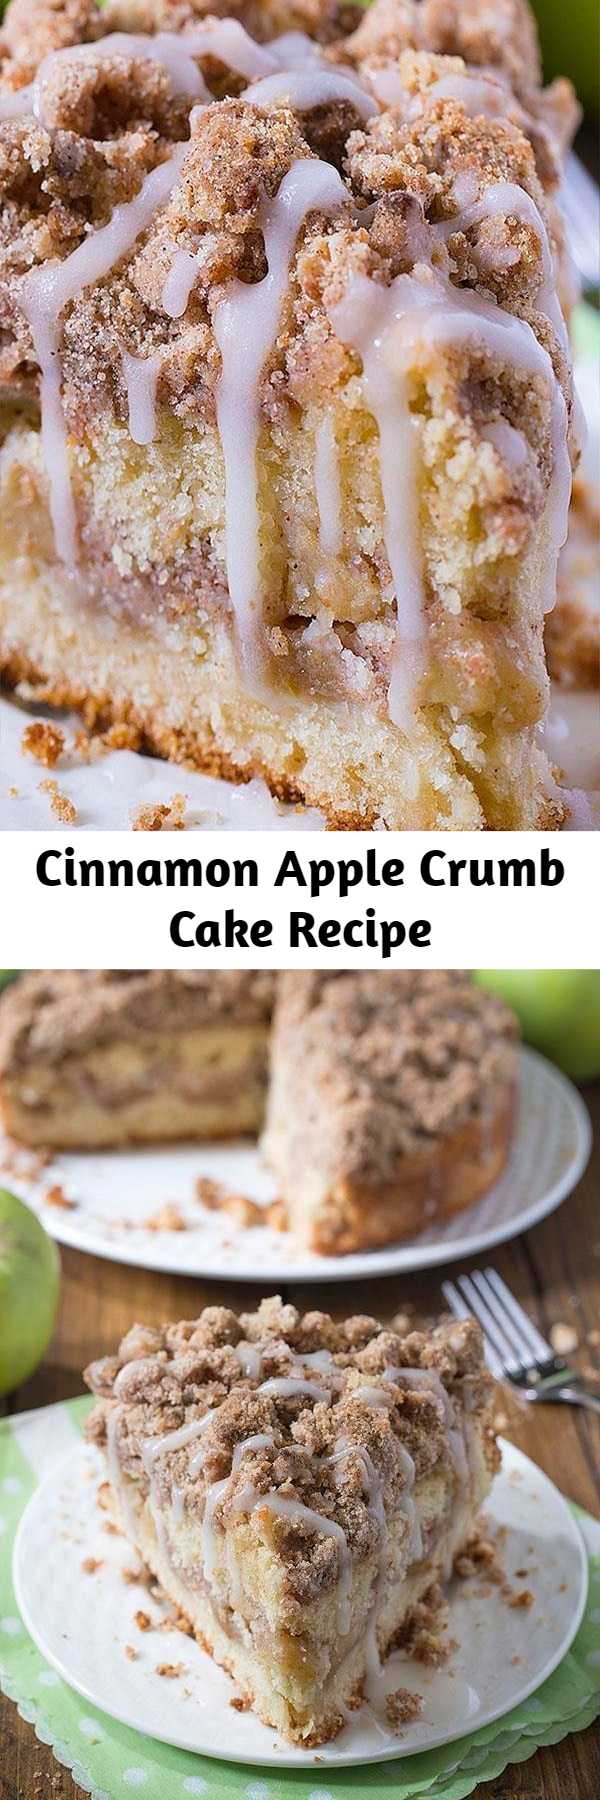 Cinnamon Apple Crumb Cake Recipe - Are you ready for fall baking? Cinnamon Apple Crumb Cake is the perfect dessert for crisp weather coming up.